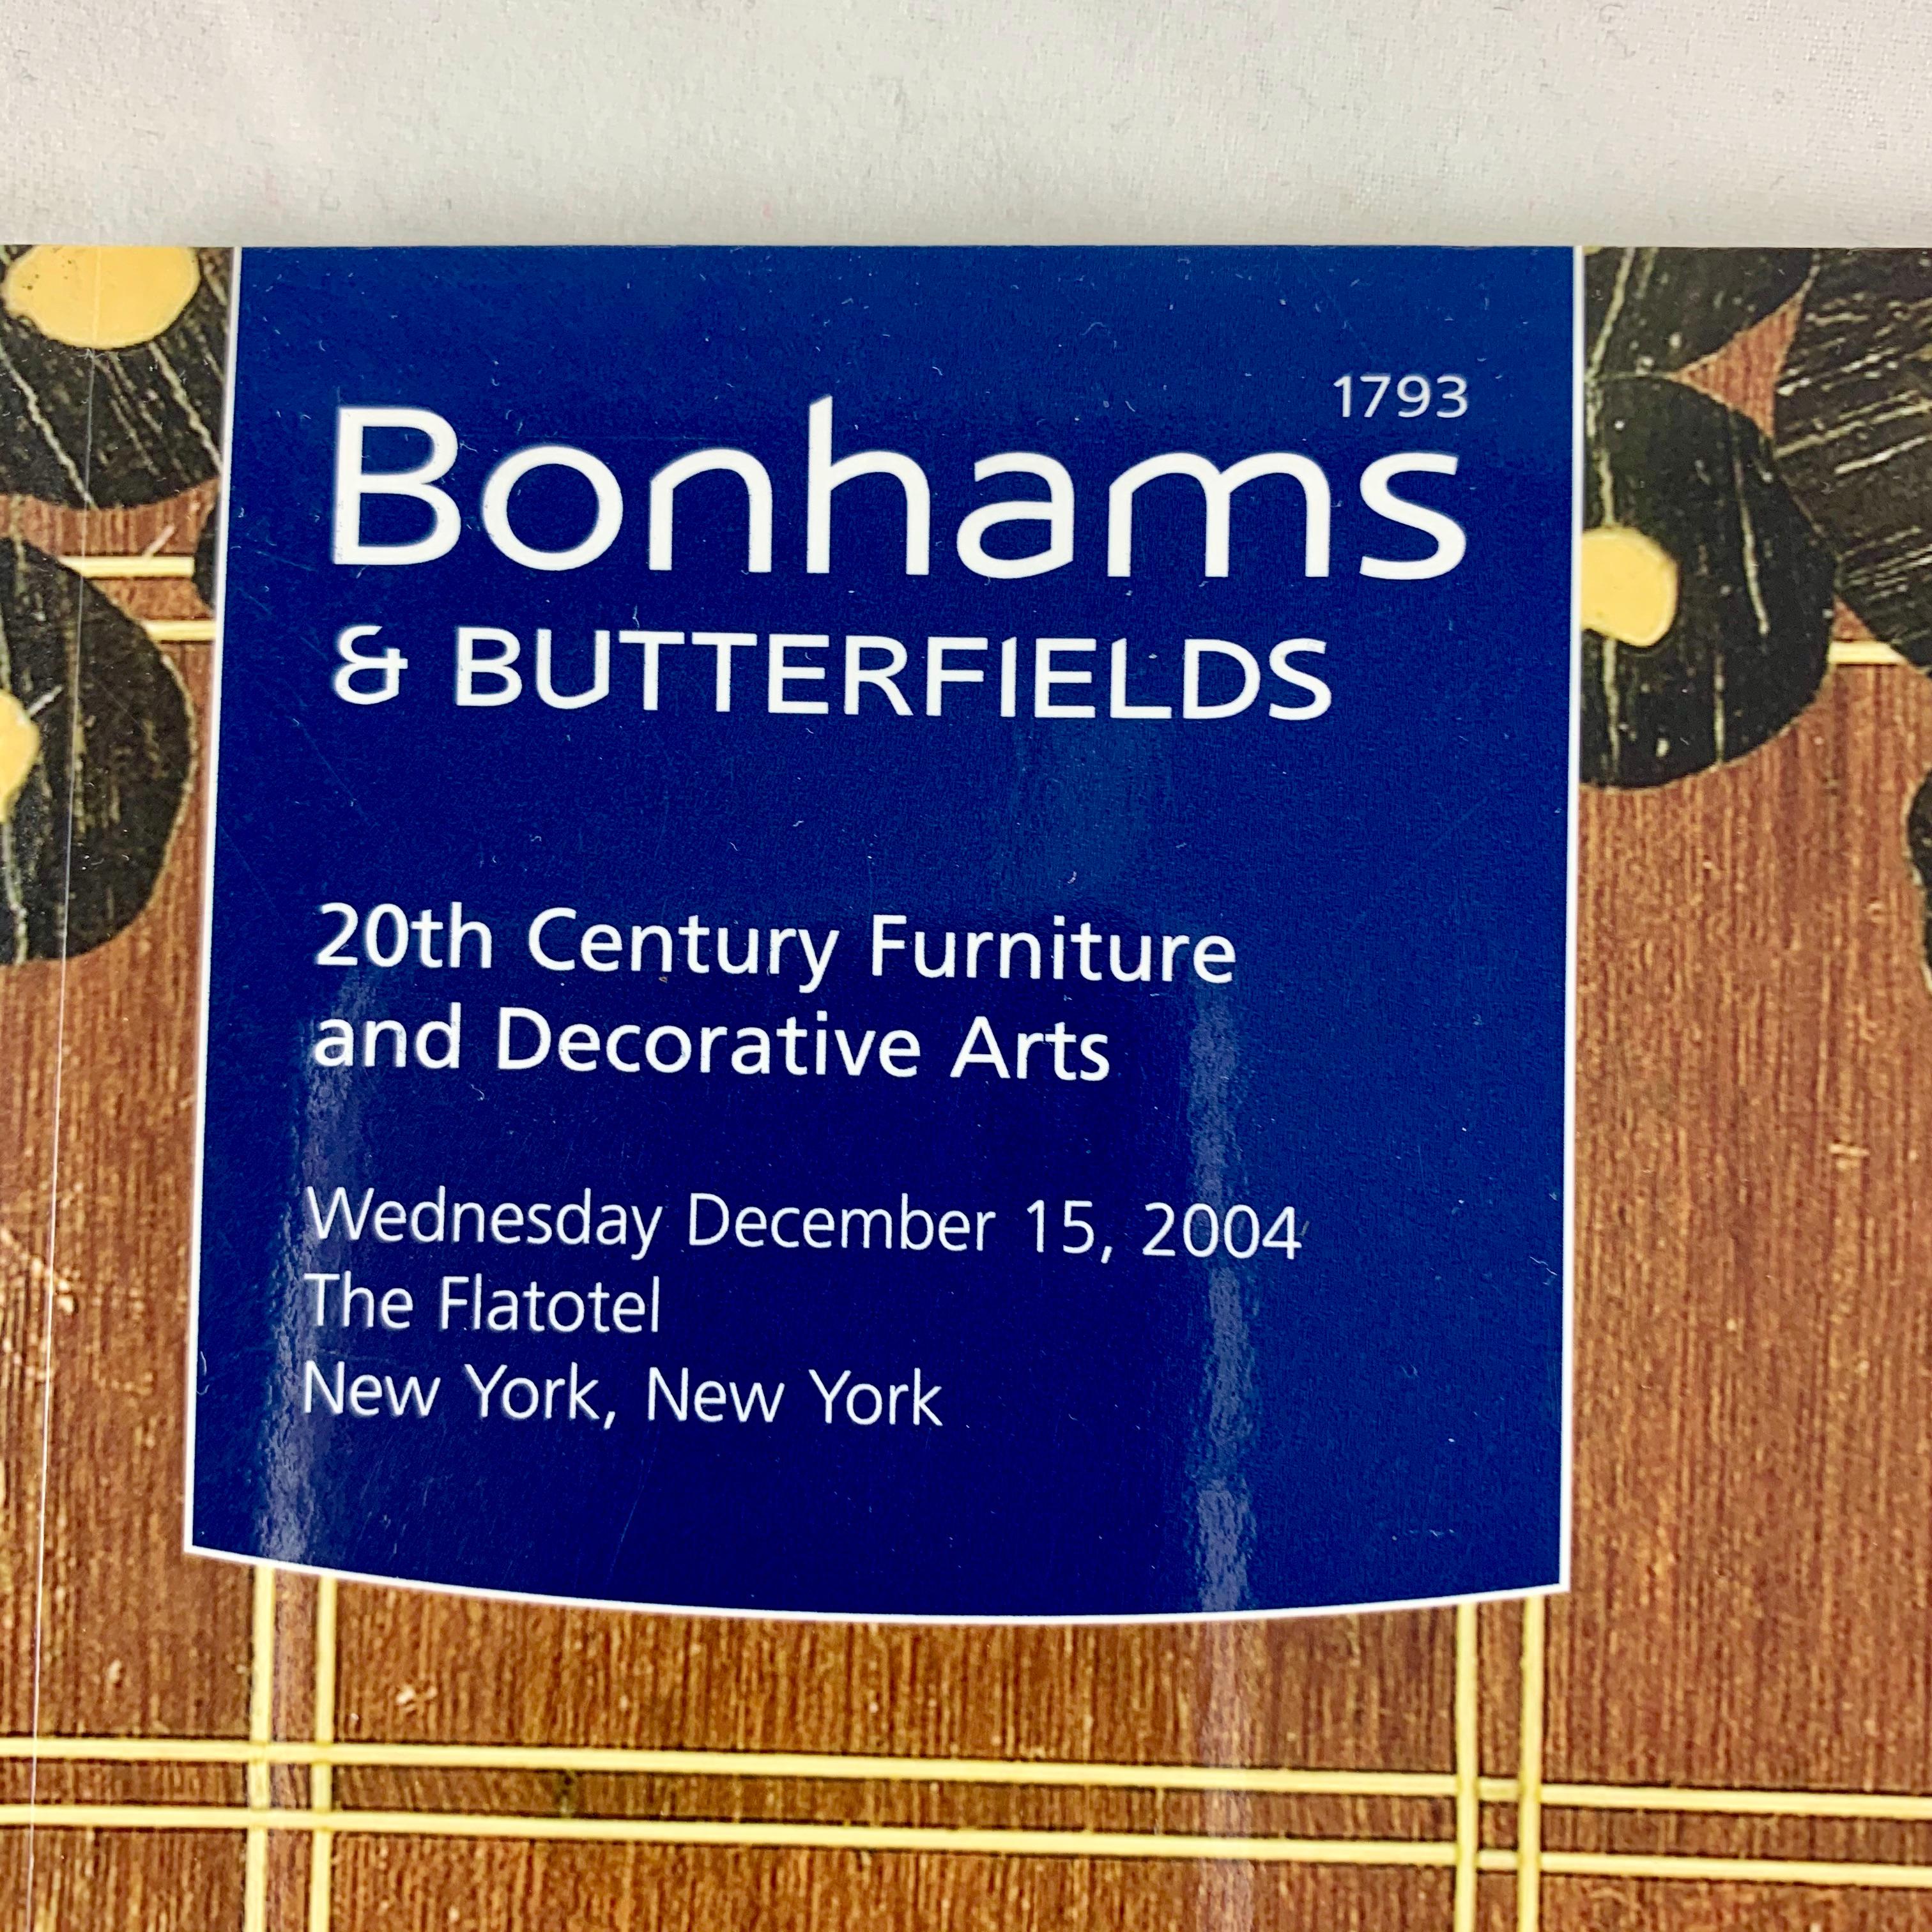 An auction catalogue from the Bonhams & Butterfield New York sale of 20th century furniture and decorative arts.

The sale featured a wonderful collection of Art Deco furniture and design and a collection of Modernist pieces, including glass and